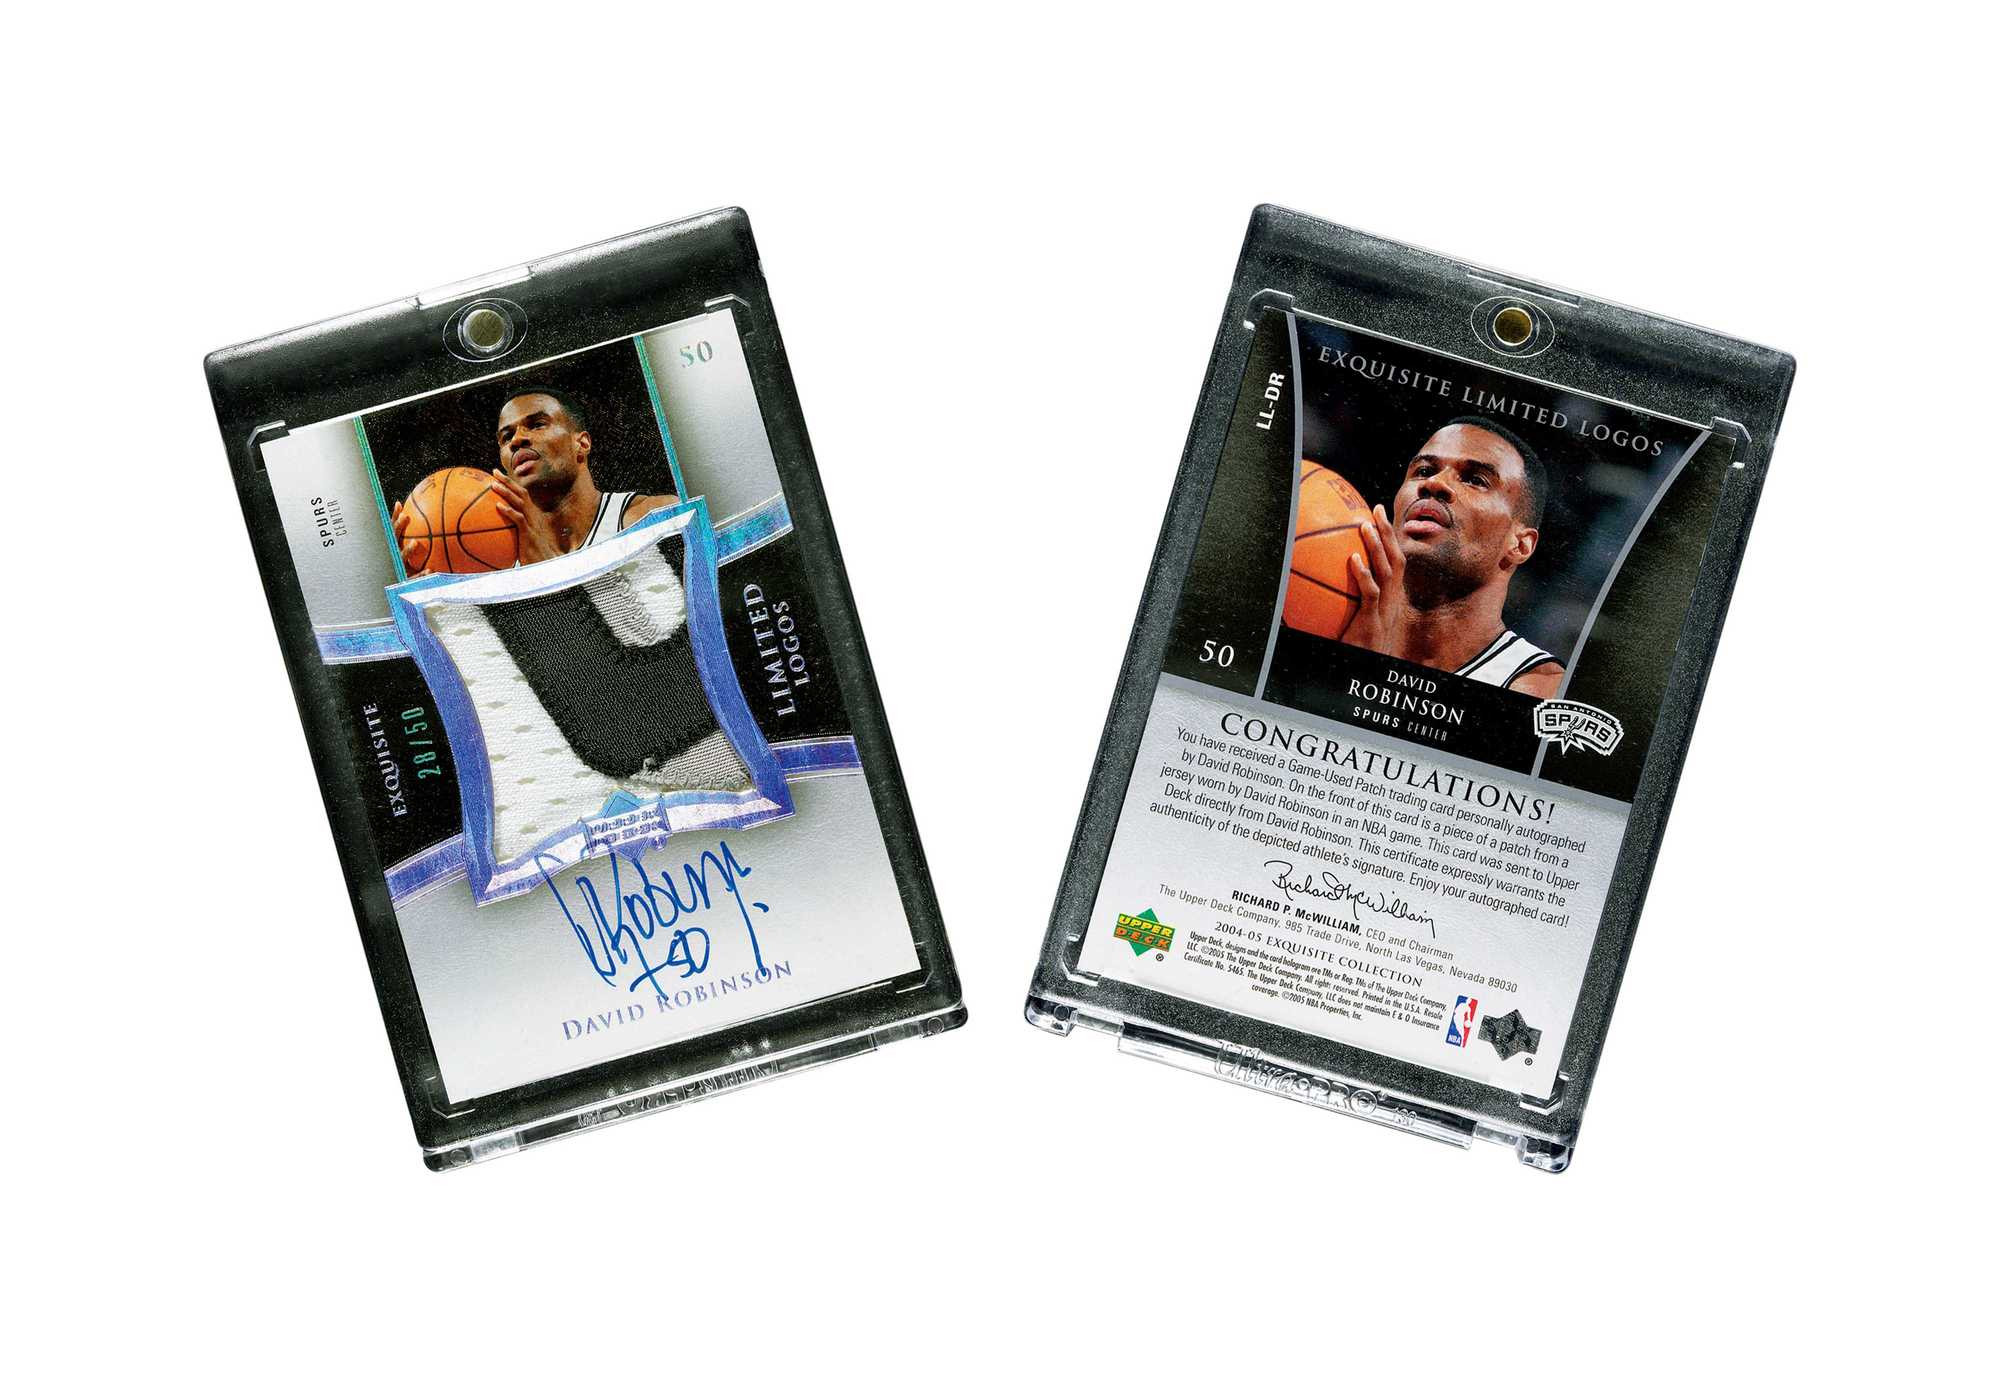 2004-05 Upper Deck Exquisite Collection Limited Logos David Robinson Patch Autograph 28/50